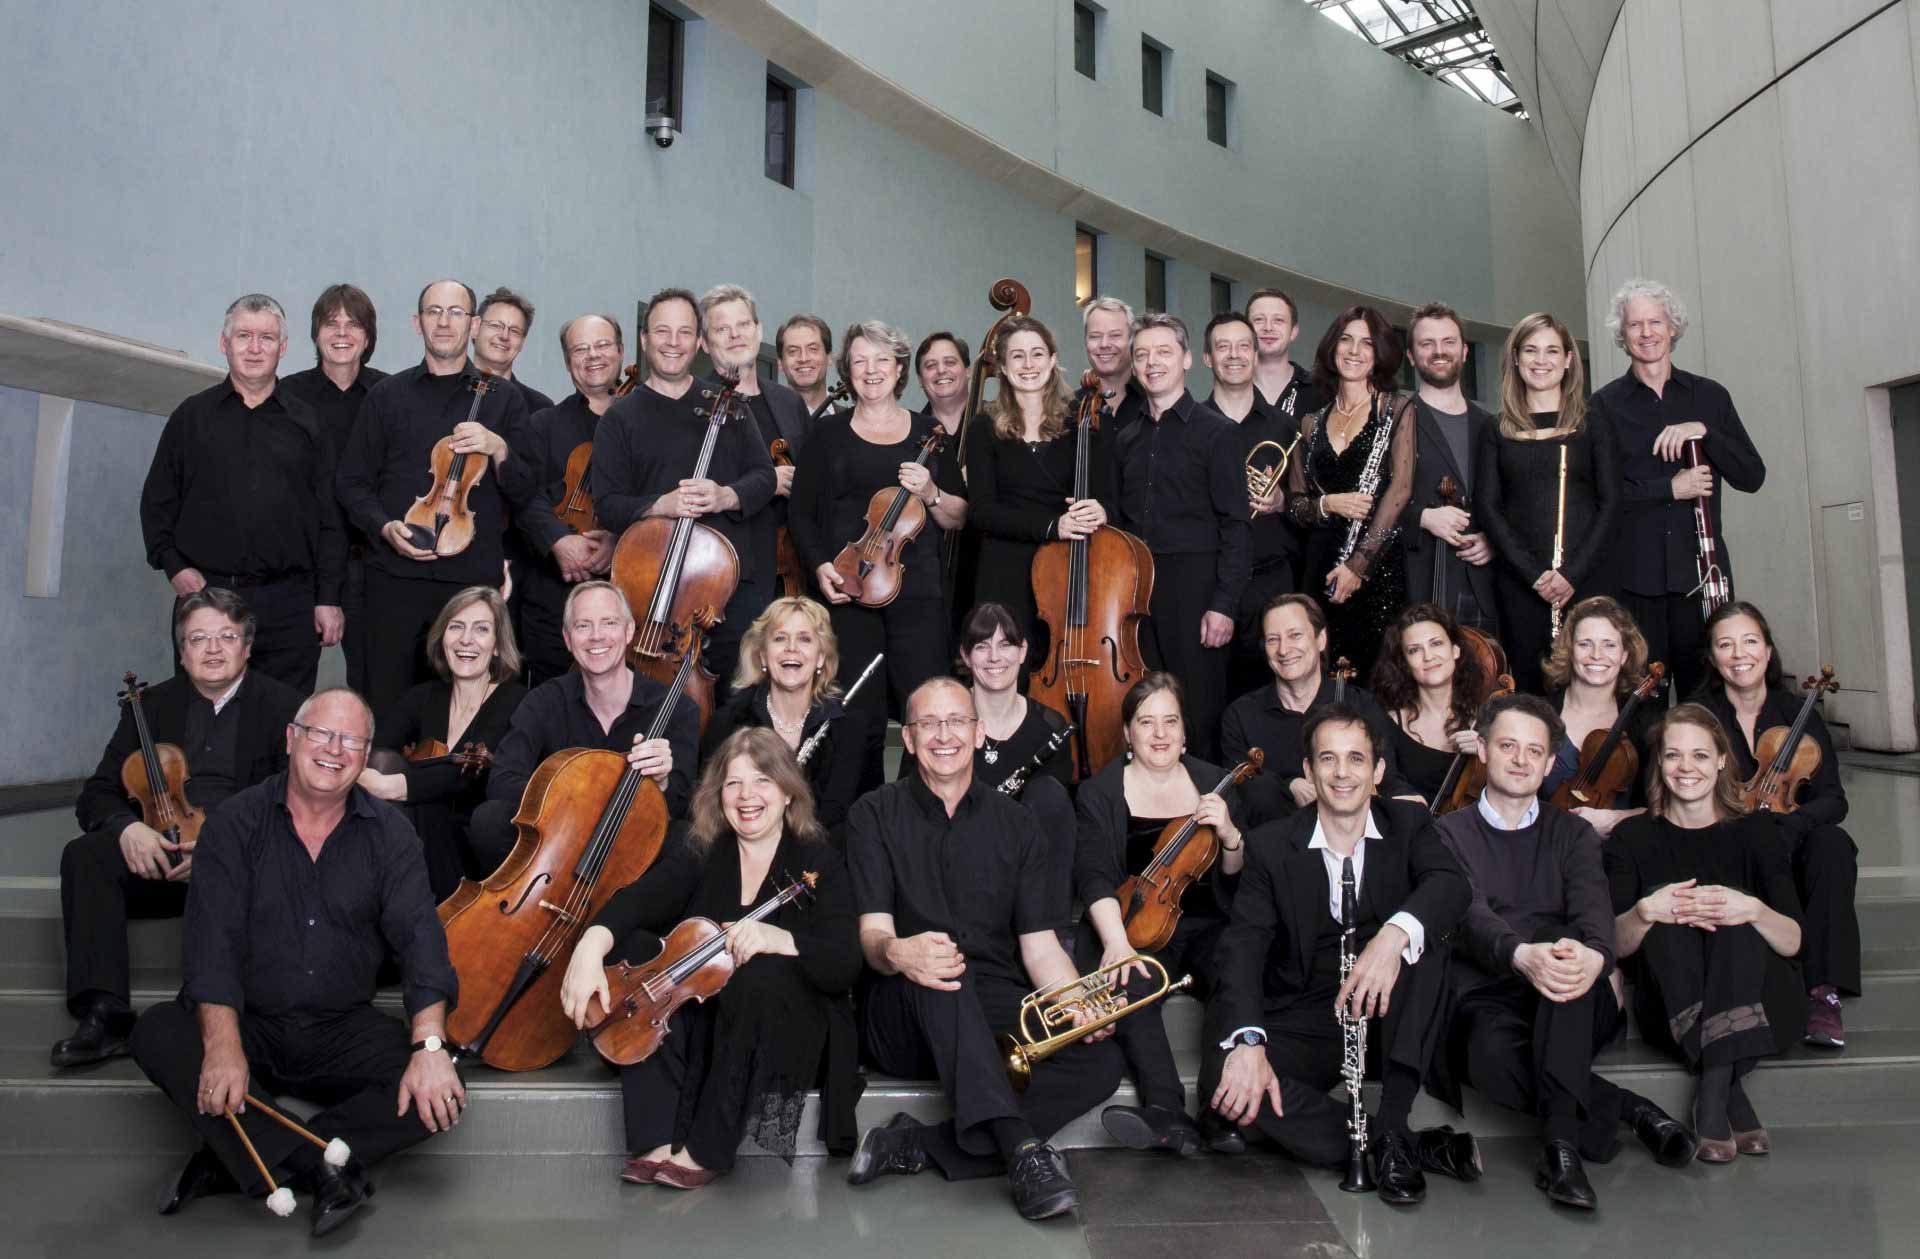 Chamber Orchestra of Europe